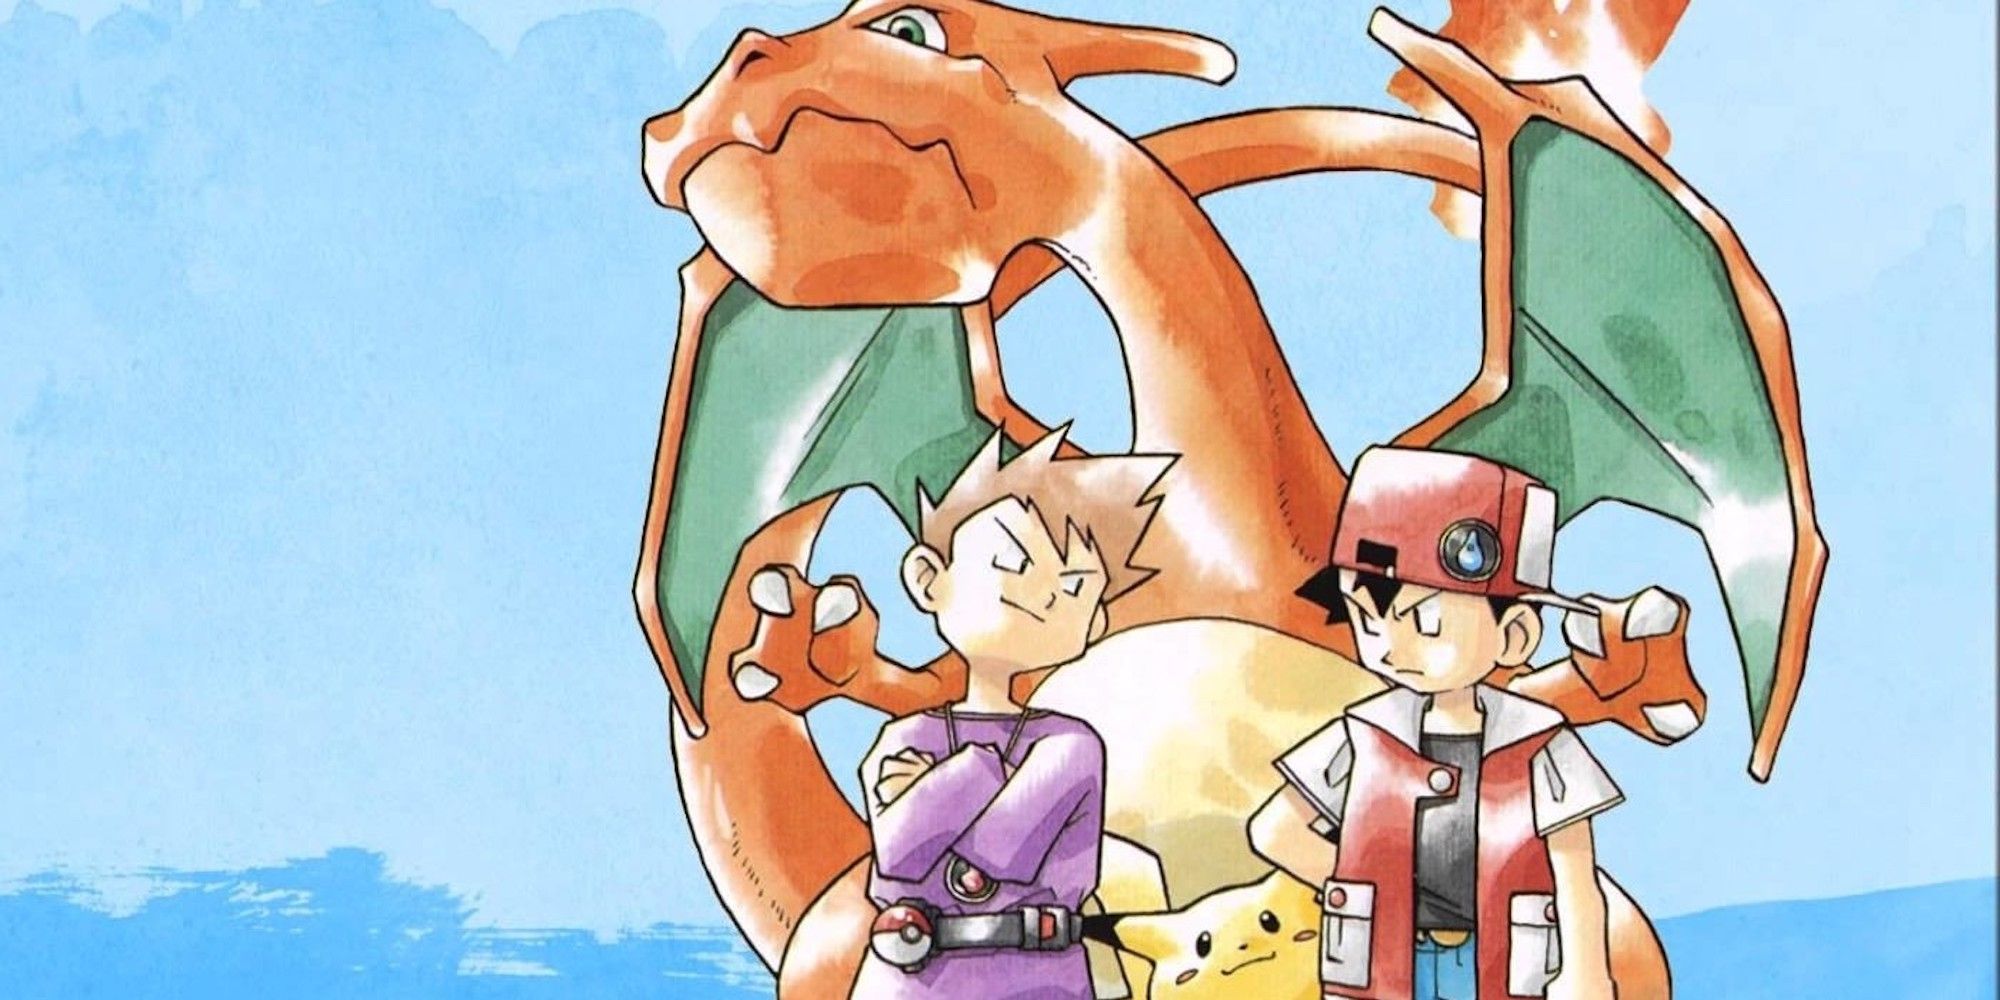 promo art featuring characters and Pokemon from Pokemon Red/Blue